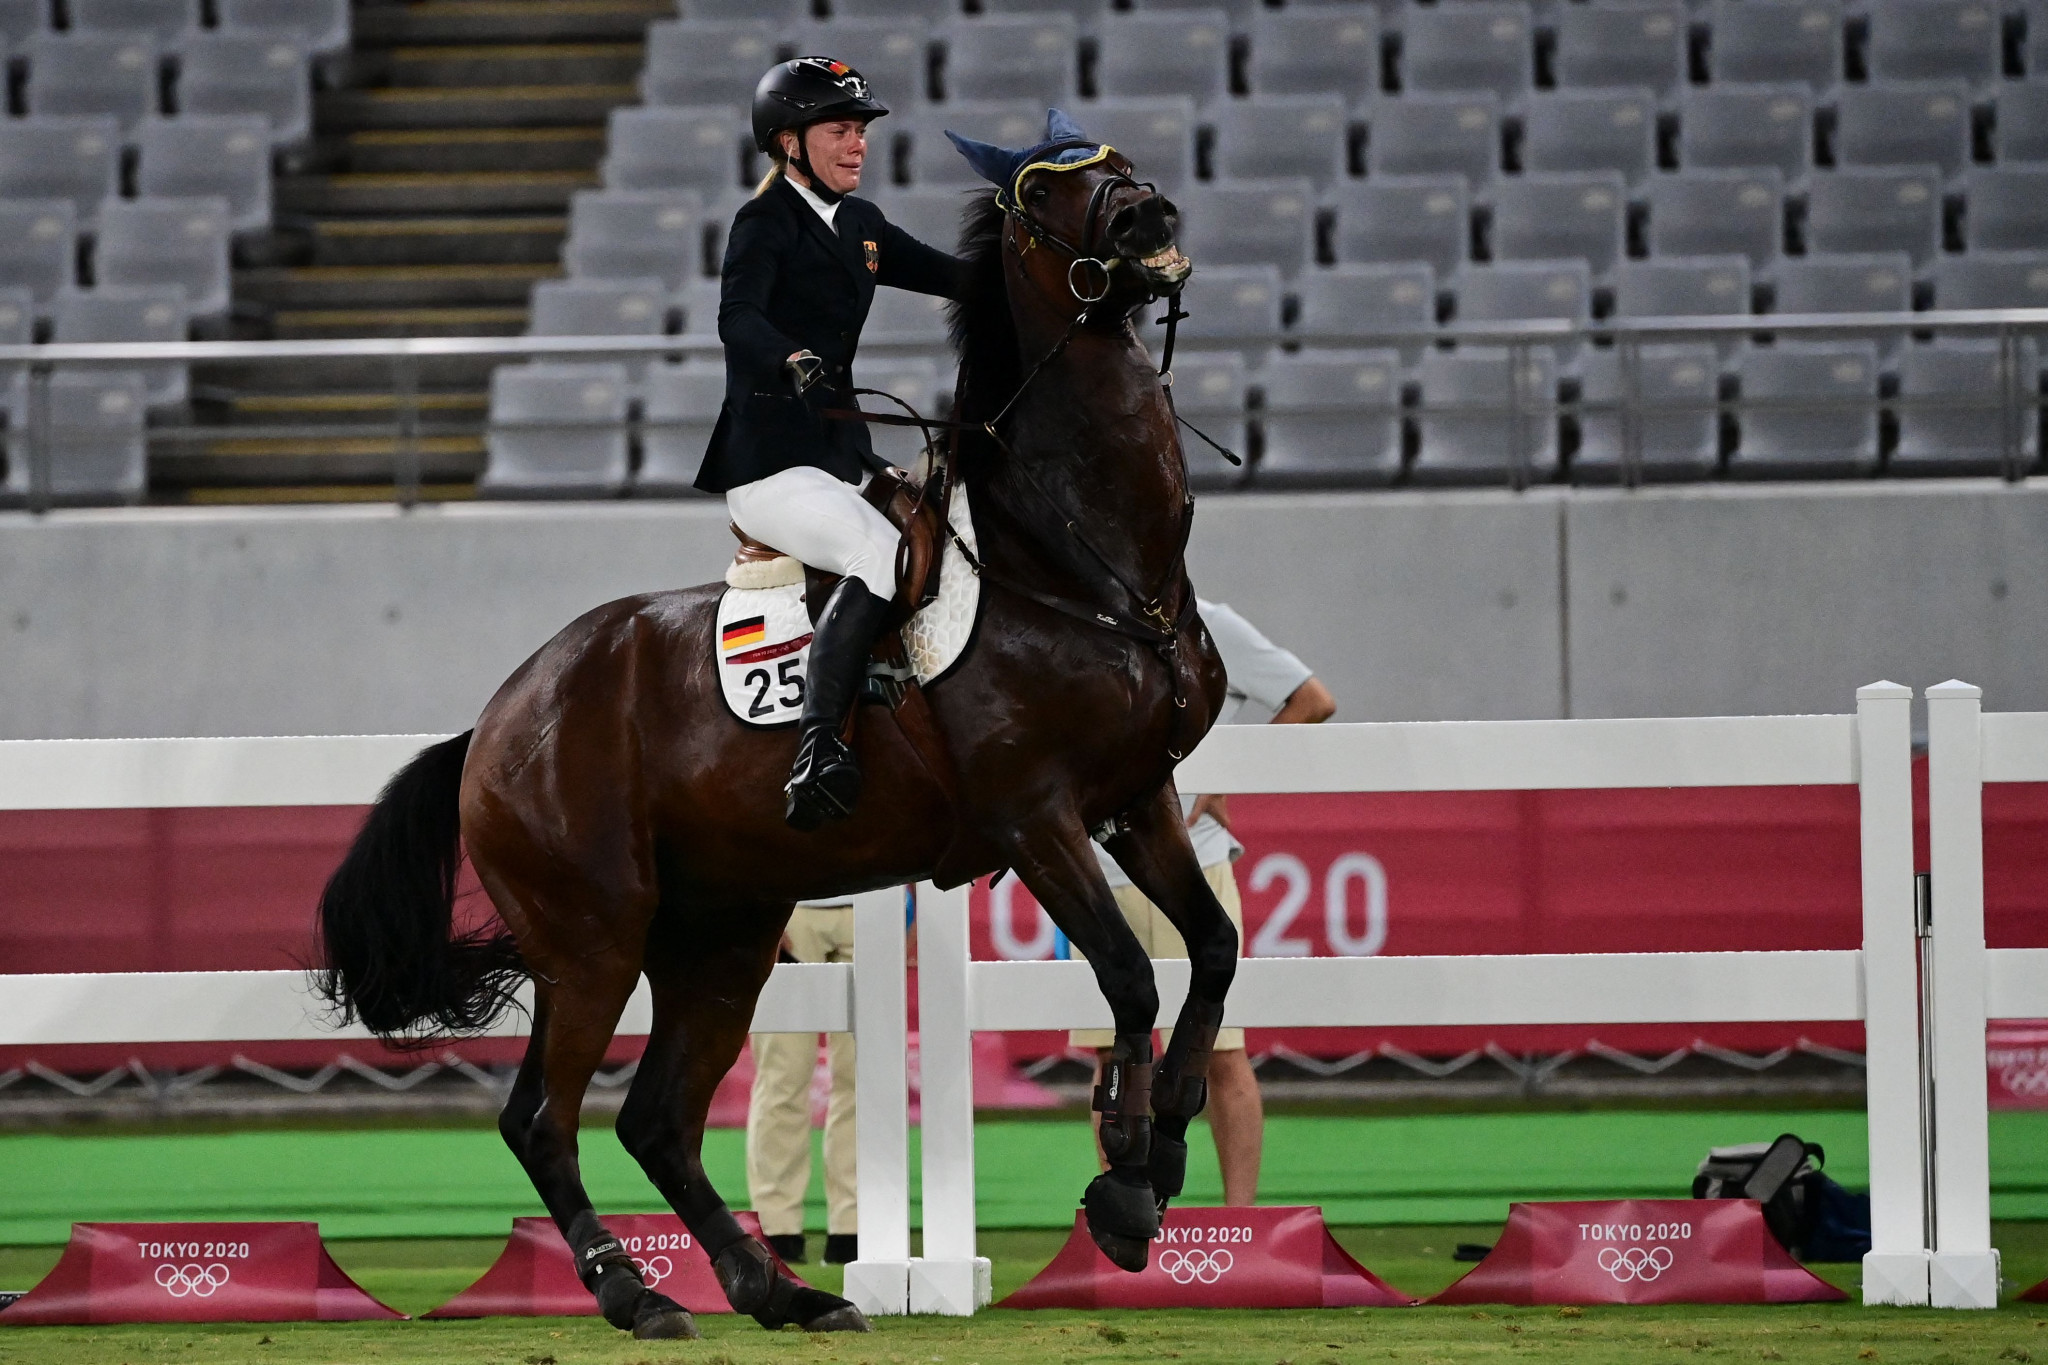 Riding was dropped after the controversy surrounding the horse Saint Boy at Tokyo 2020, although many athletes are unhappy at the change and the process which has led to it ©Getty Images